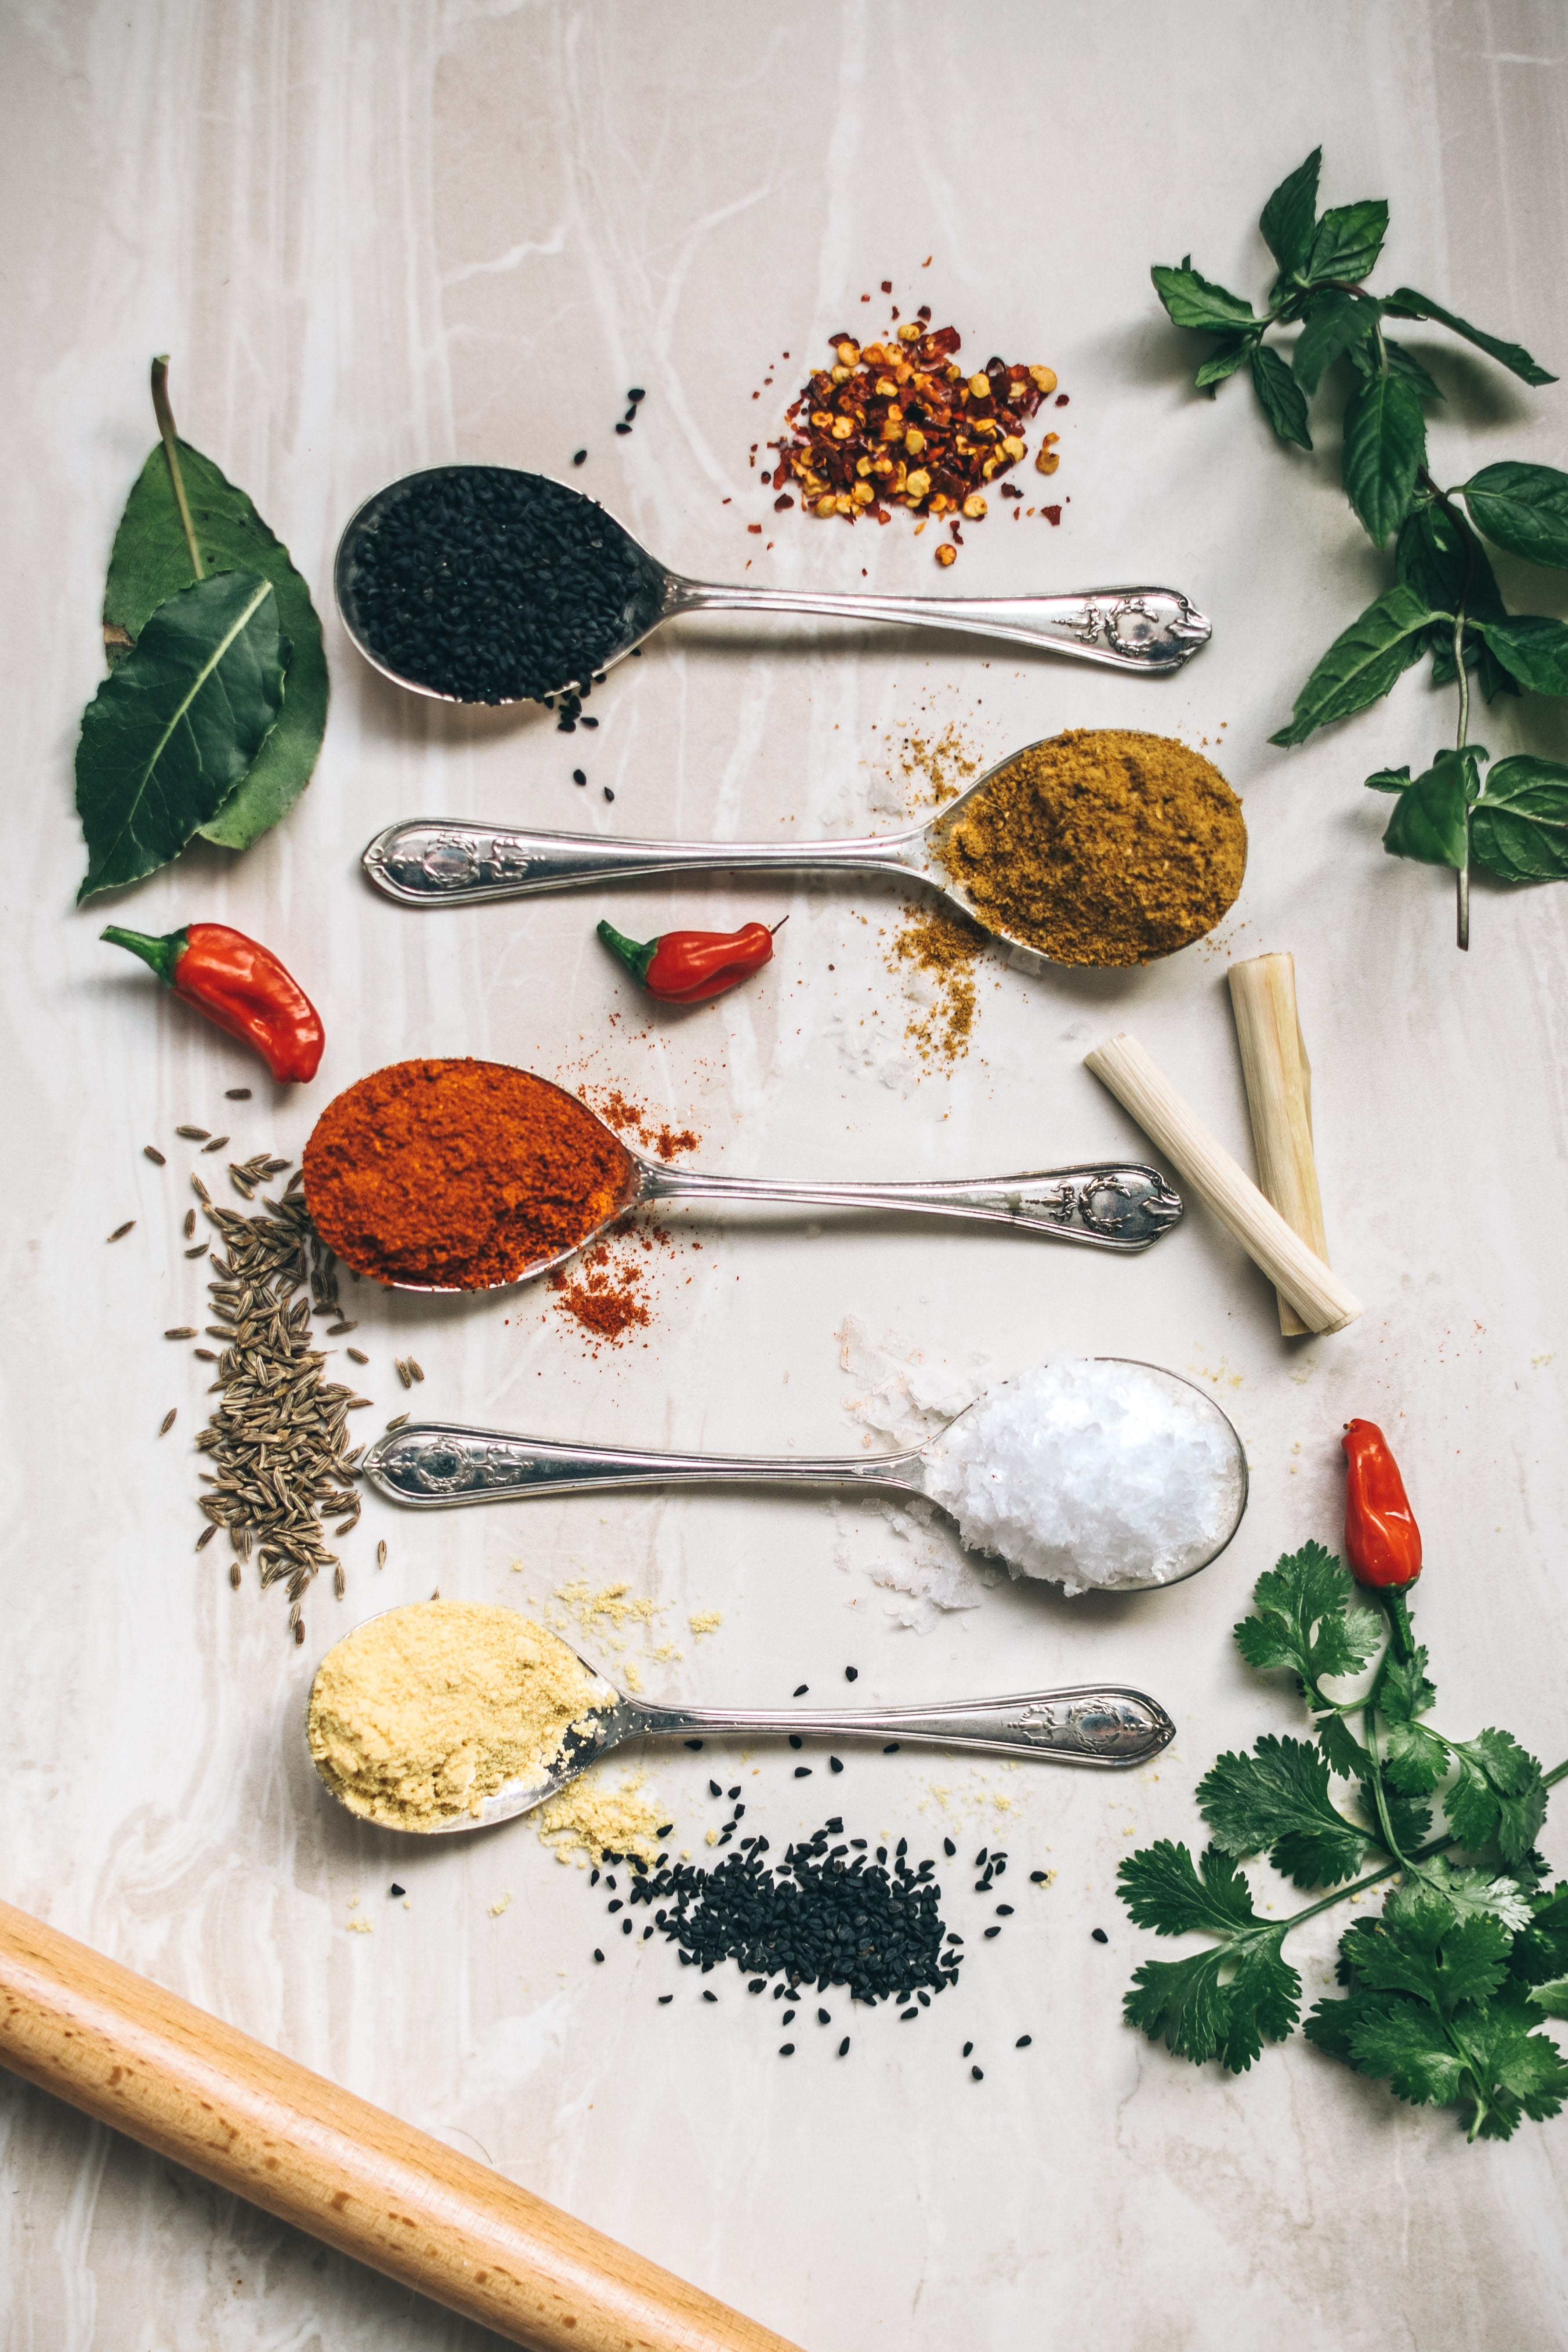 Five spoons with various powders, surrounded by herbs; image by Calum Lewis, via Unsplash.com.